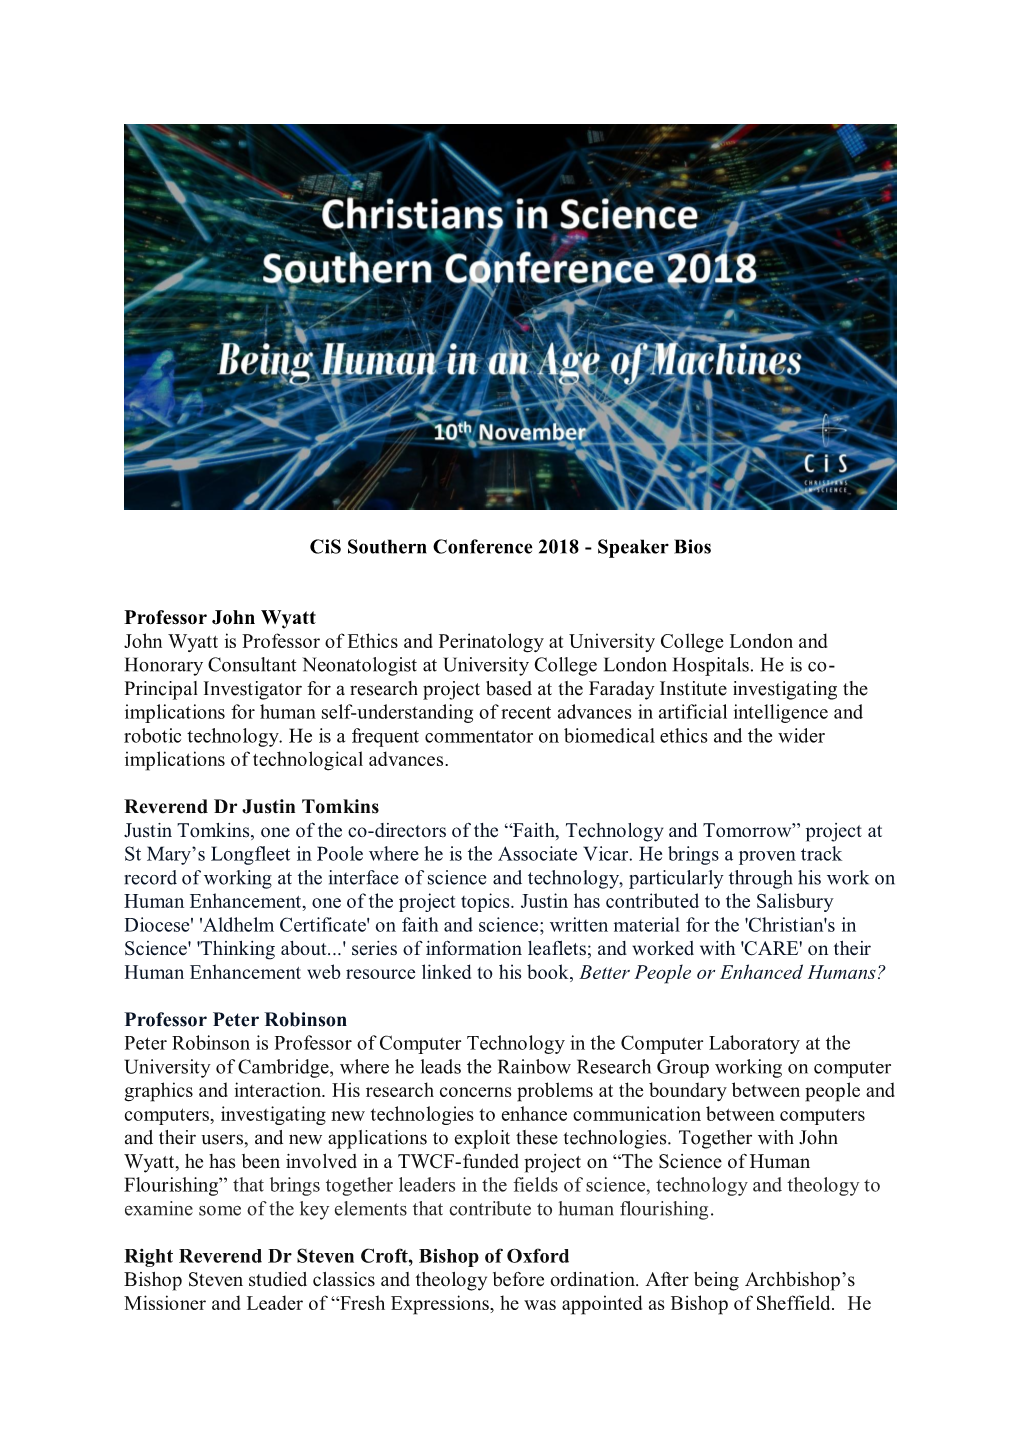 Cis Southern Conference 2018 - Speaker Bios